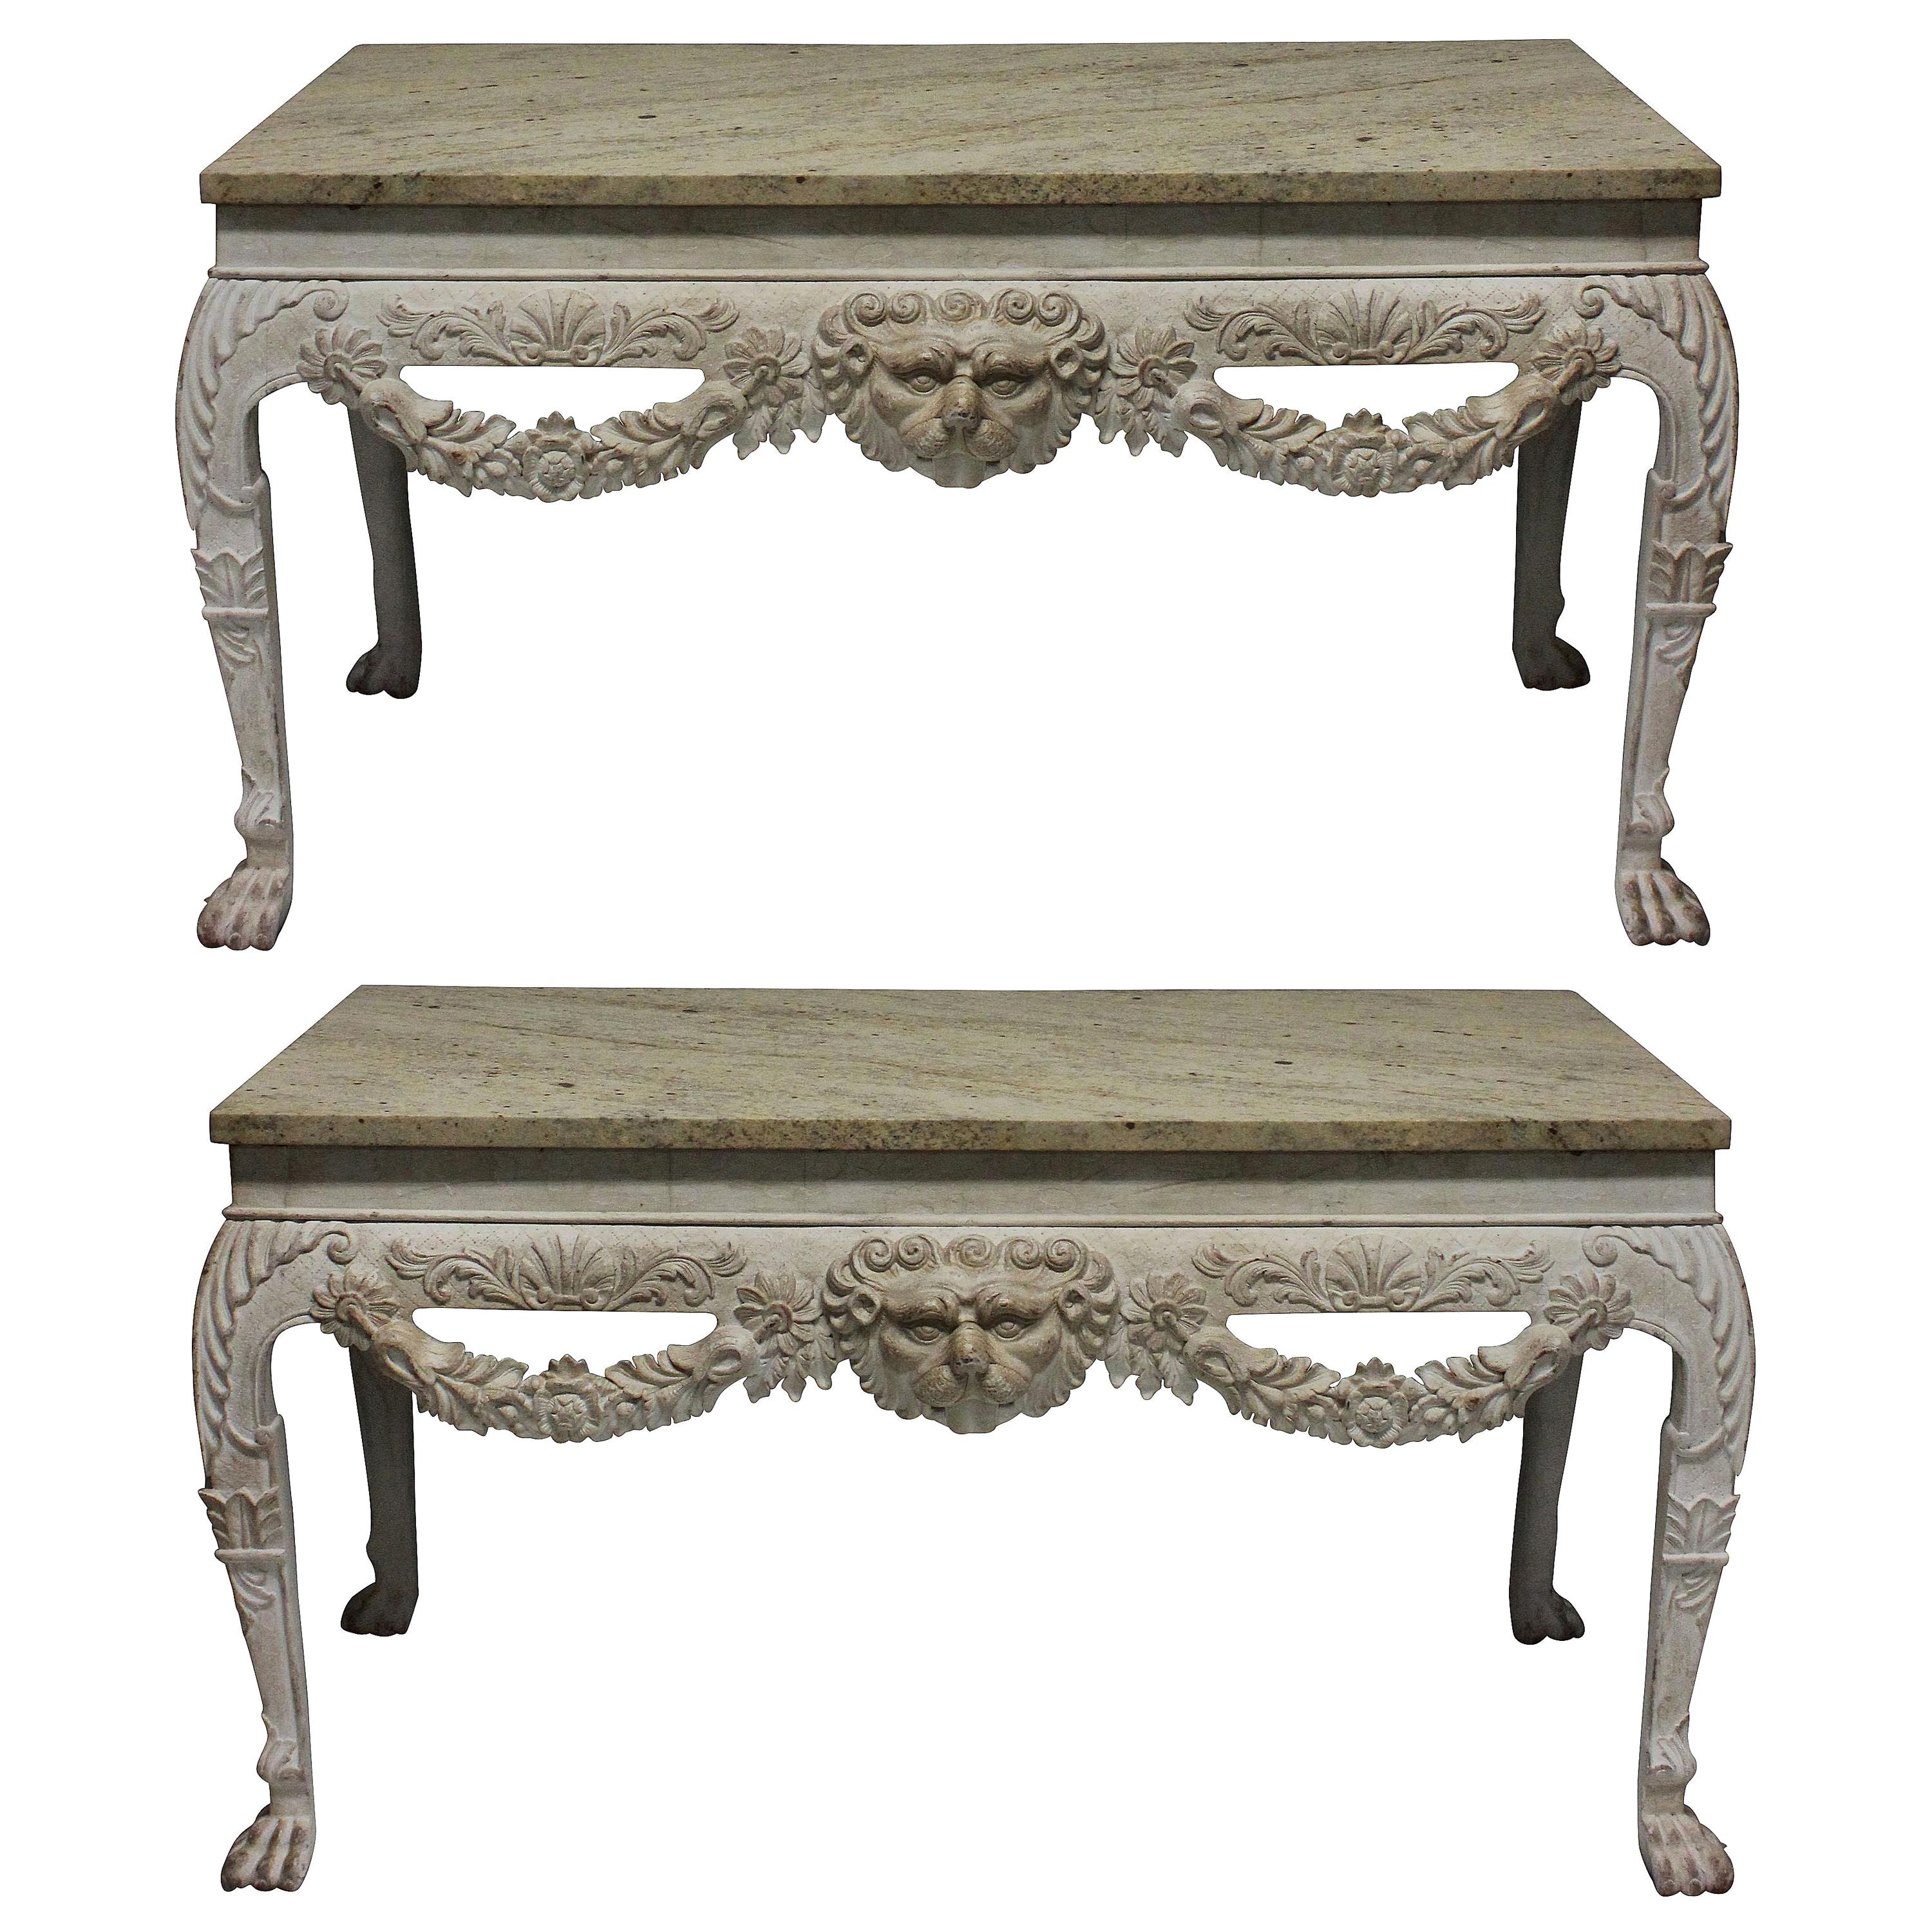 Pair of Large XVIII Century Style Painted Marble Top Consoles